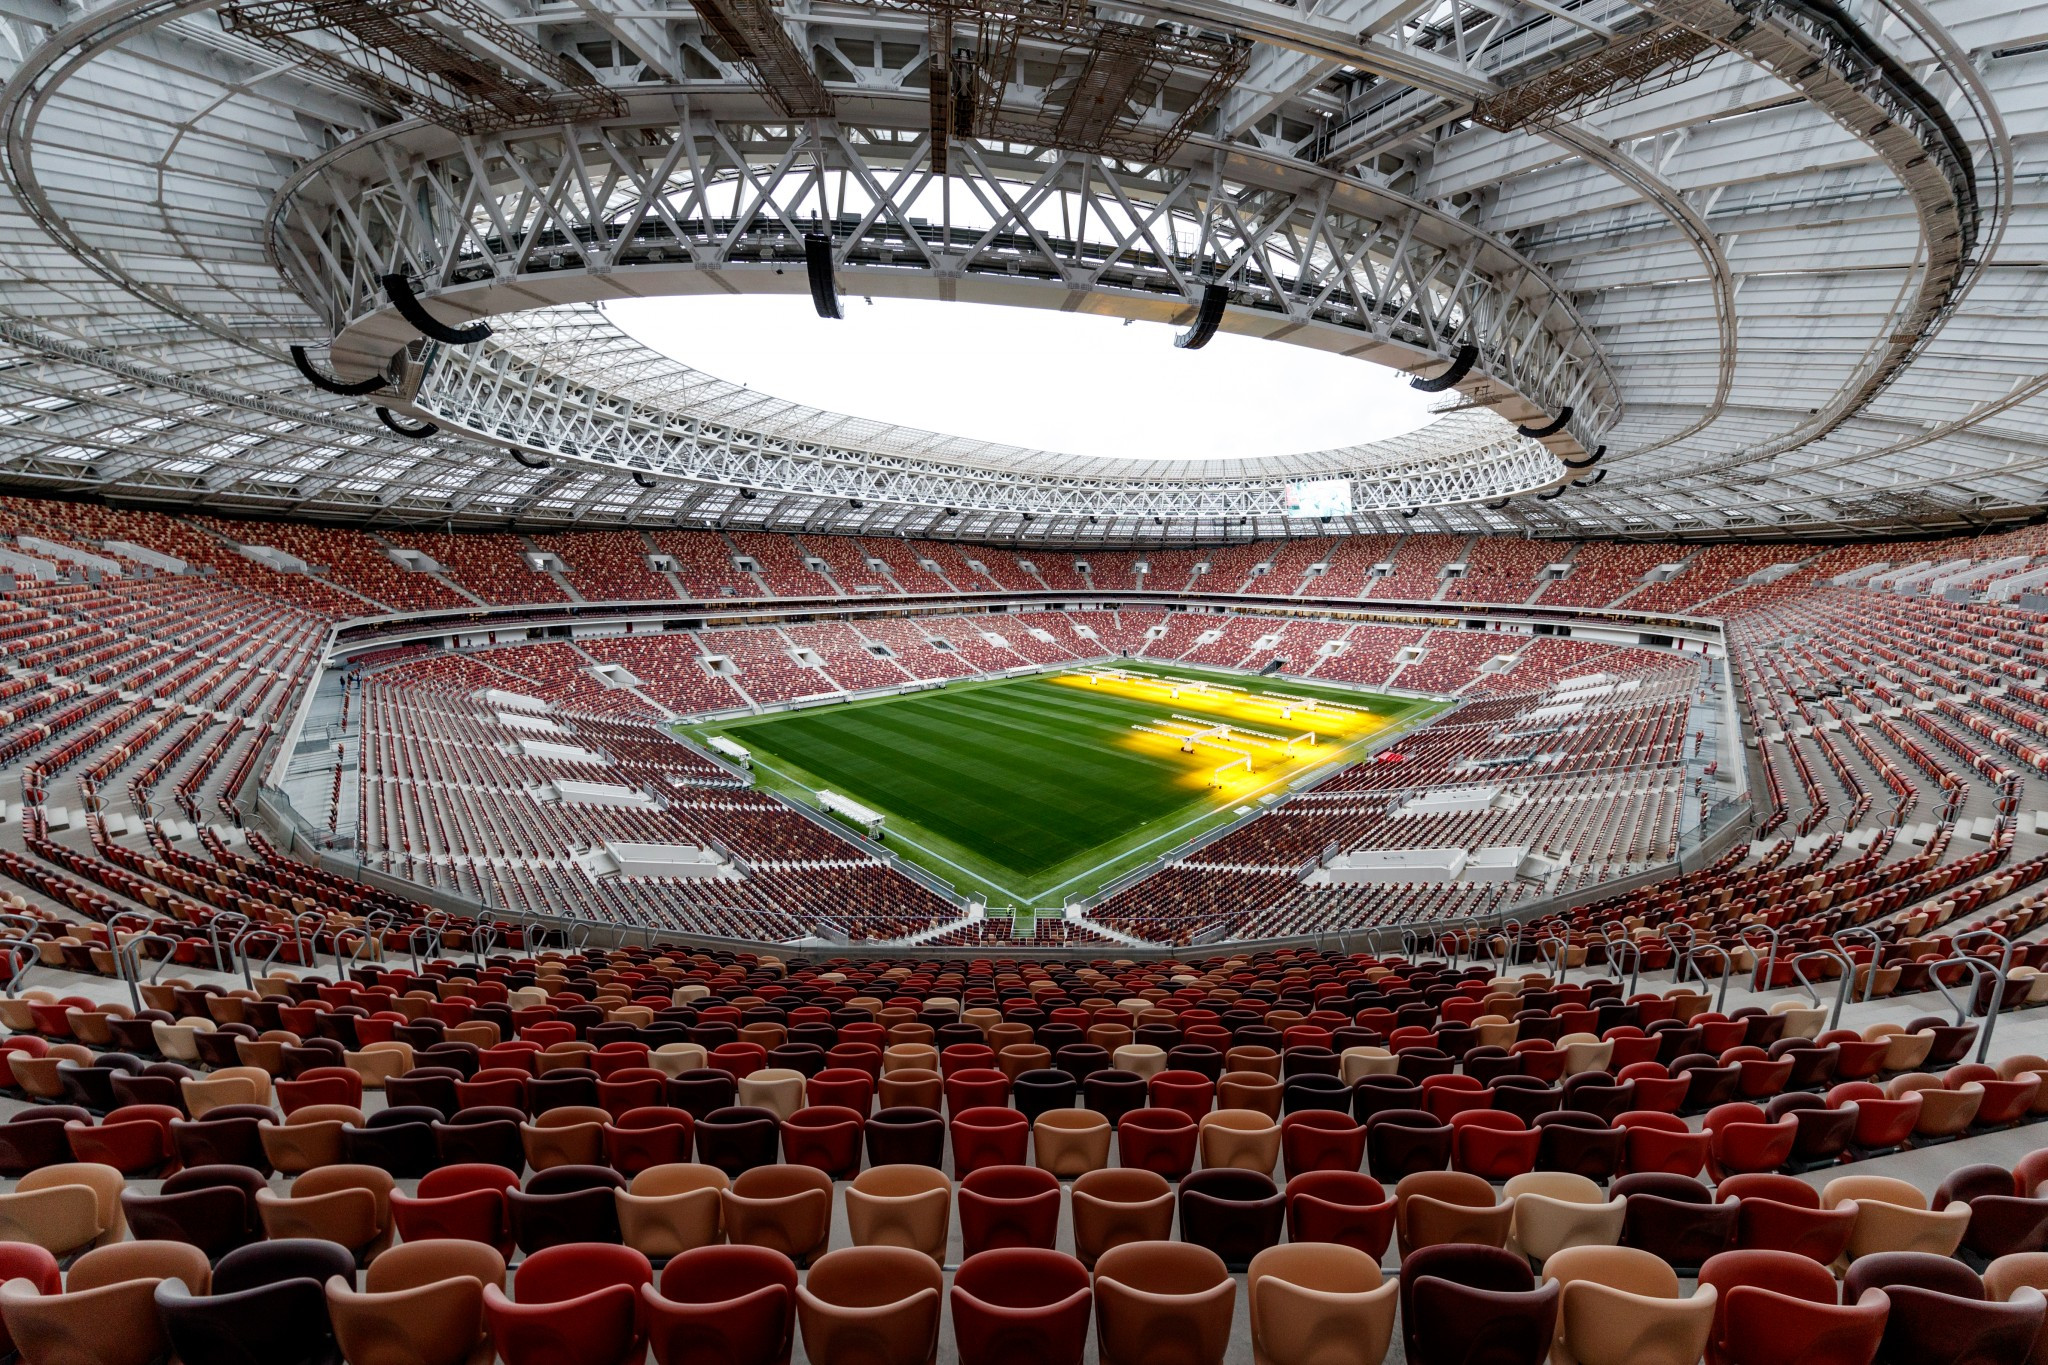 The Luzhniki Stadium will host the World Cup final ©Getty Images